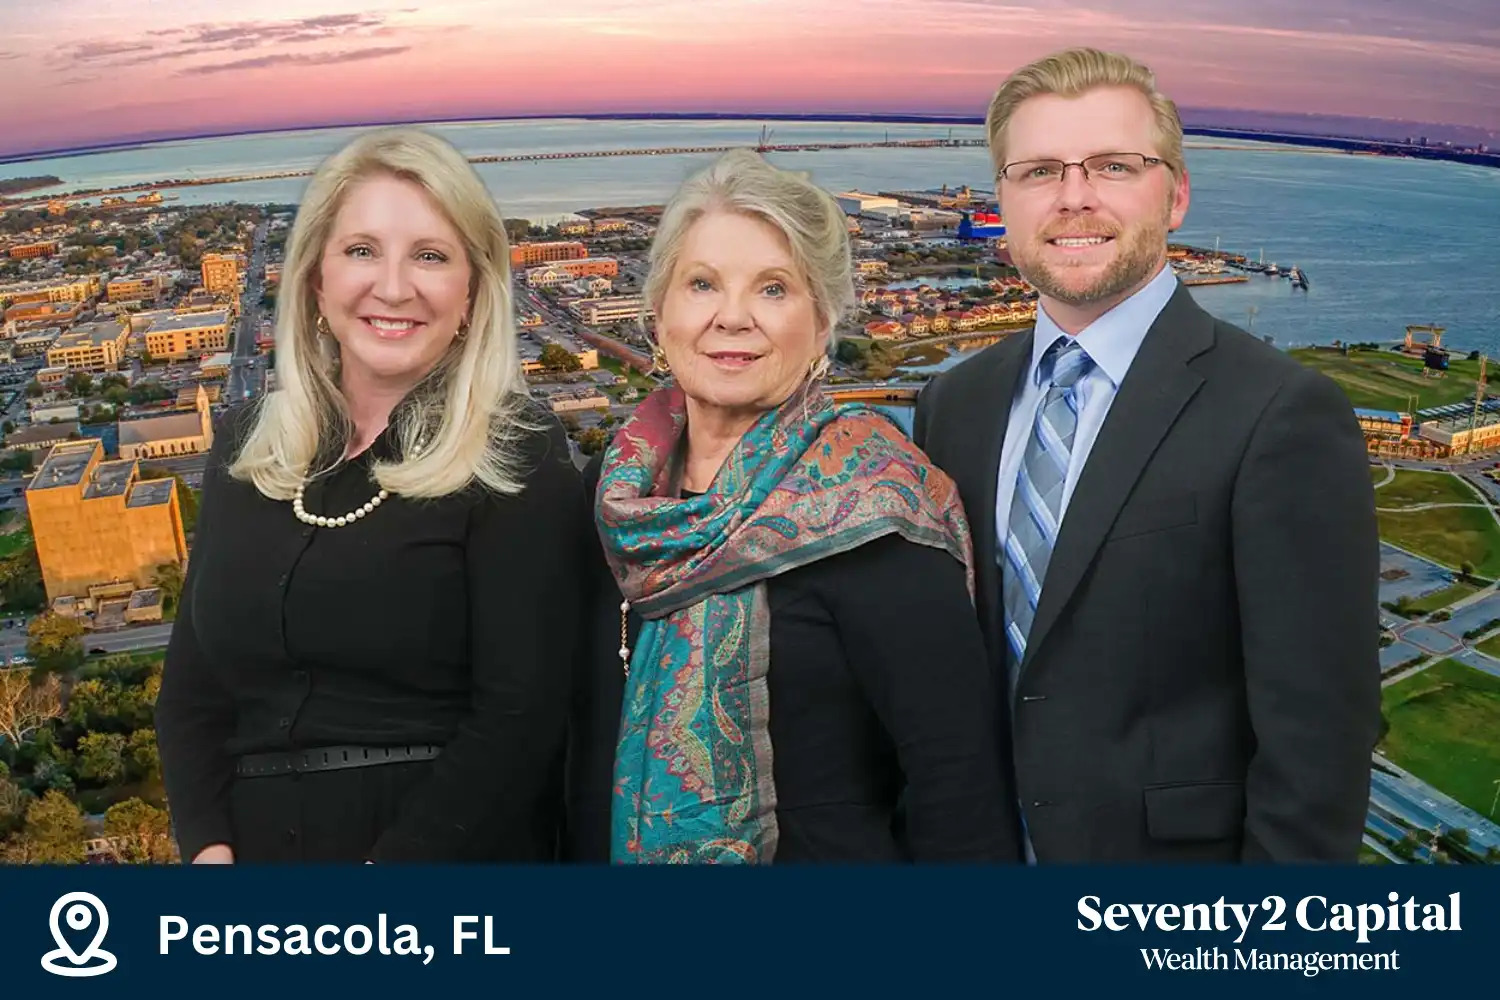 Seventy2 Capital expands into Pensacola, FL with the addition of the Stewart Markey Group